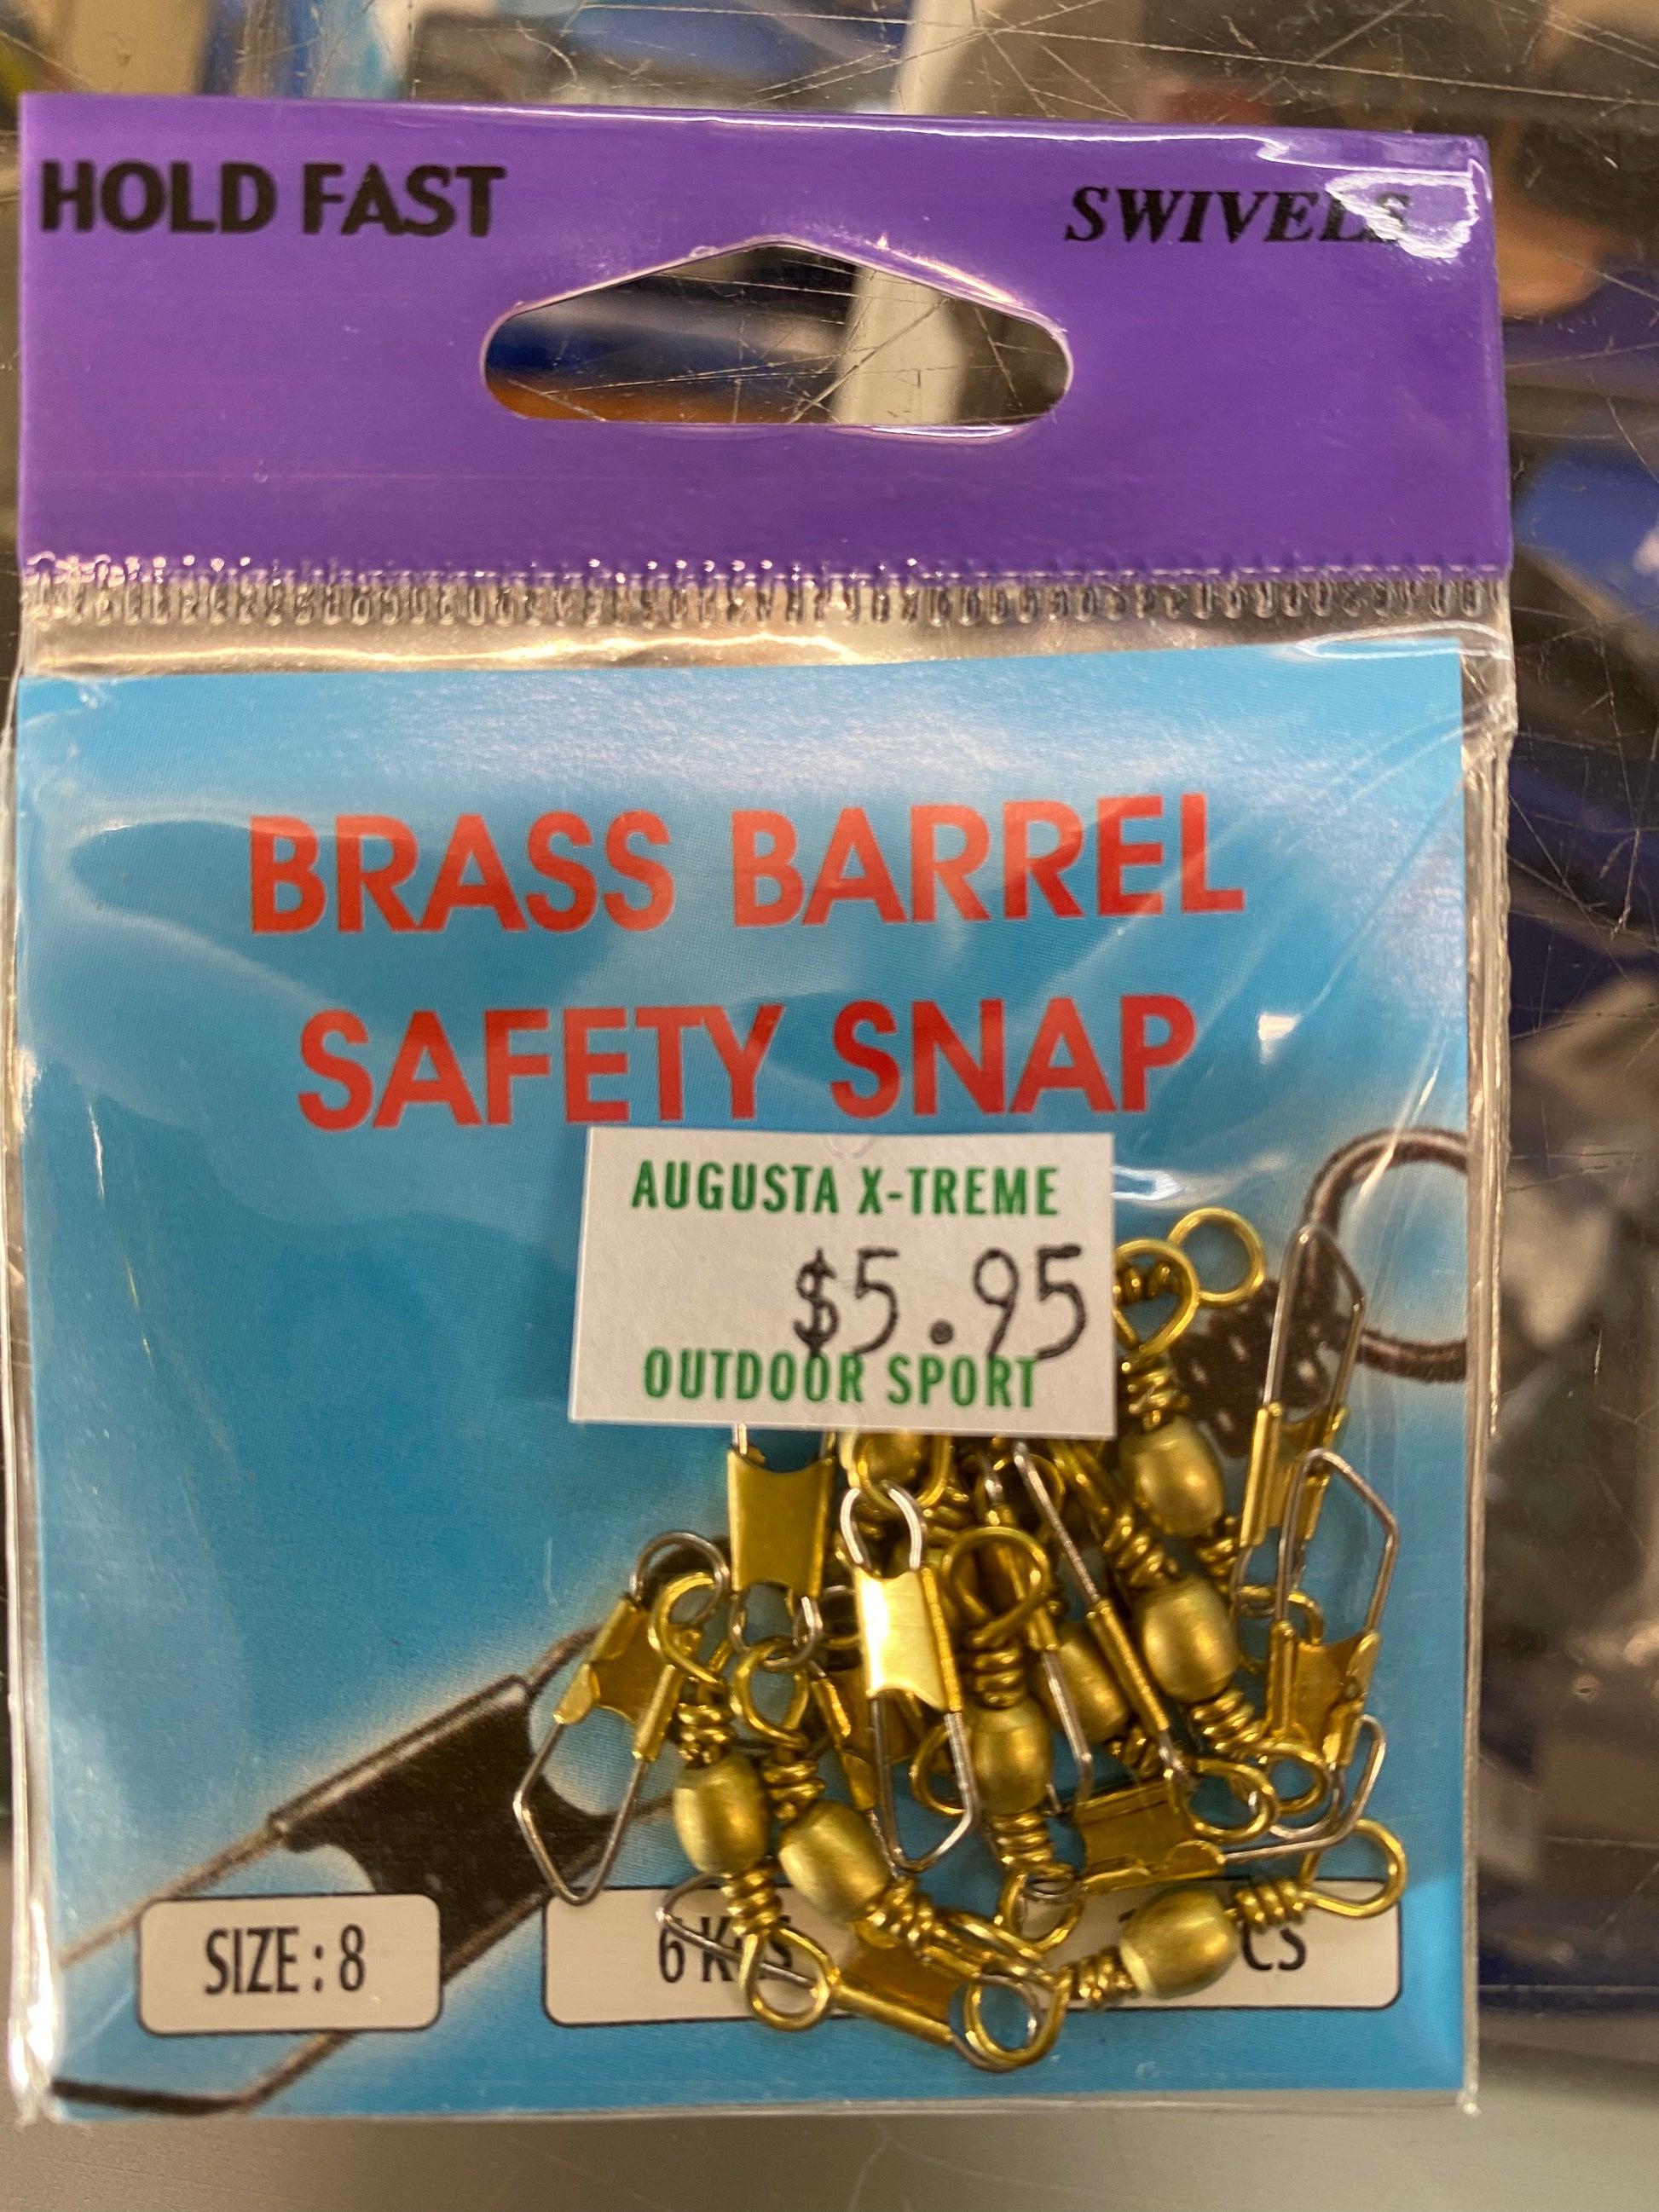 Hold Fast Swivel Barrel Safety Snap Size 12 Qty 10